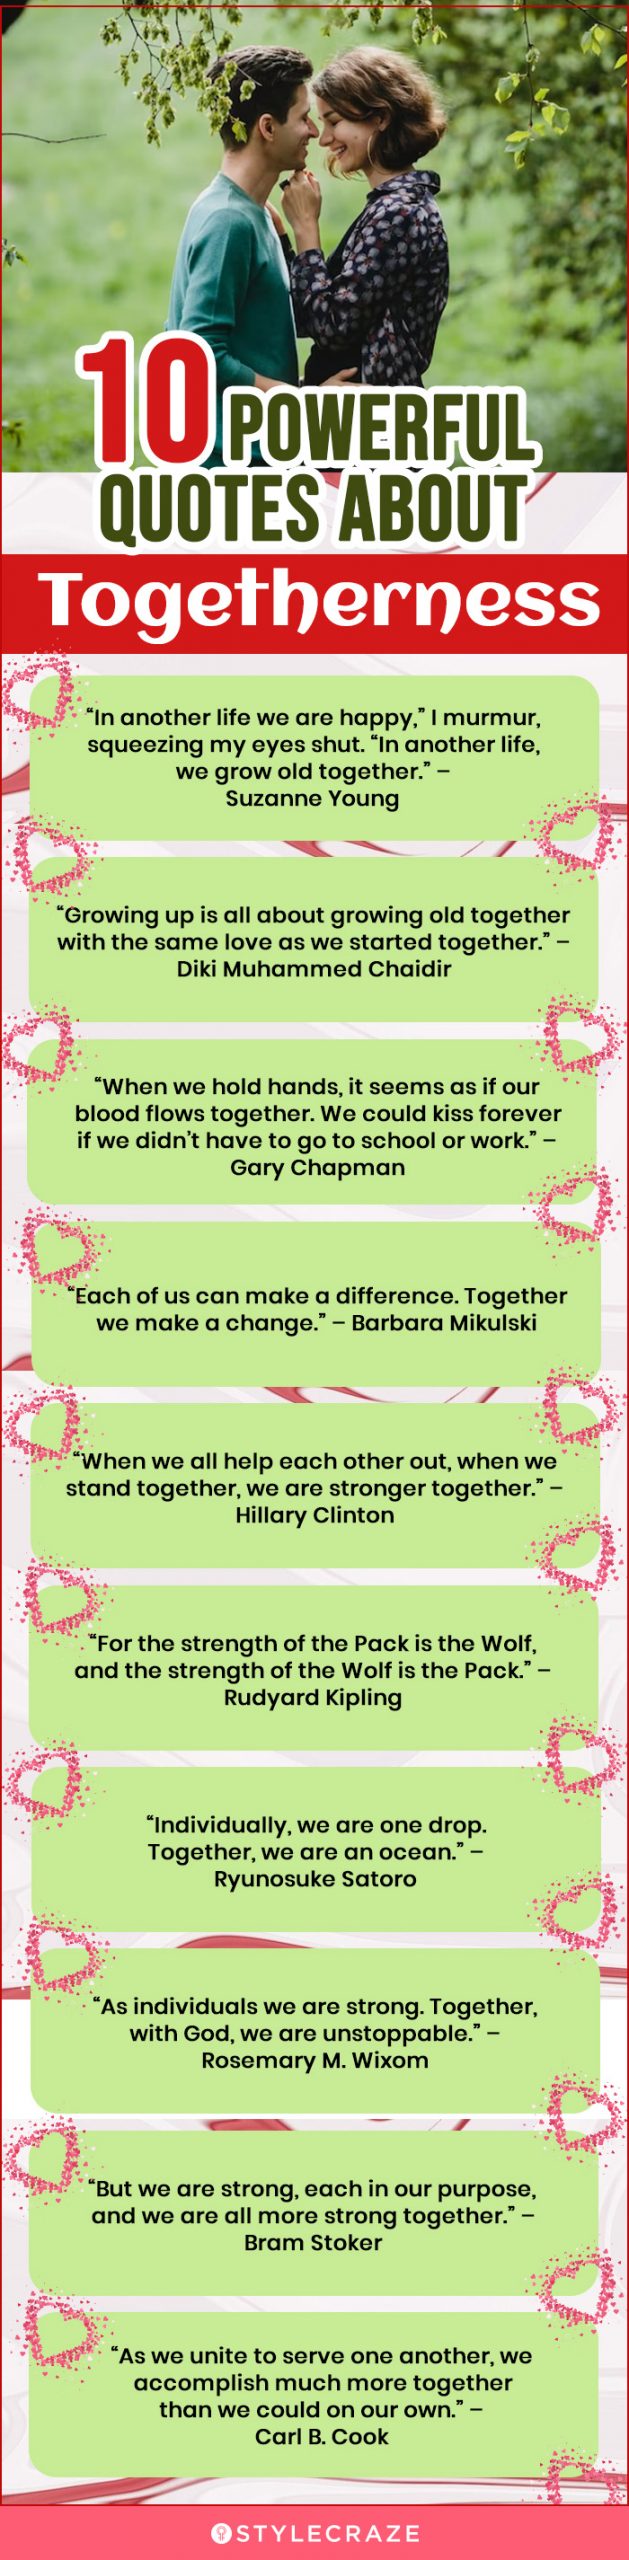 10 powerful quotes about togetherness (infographic)